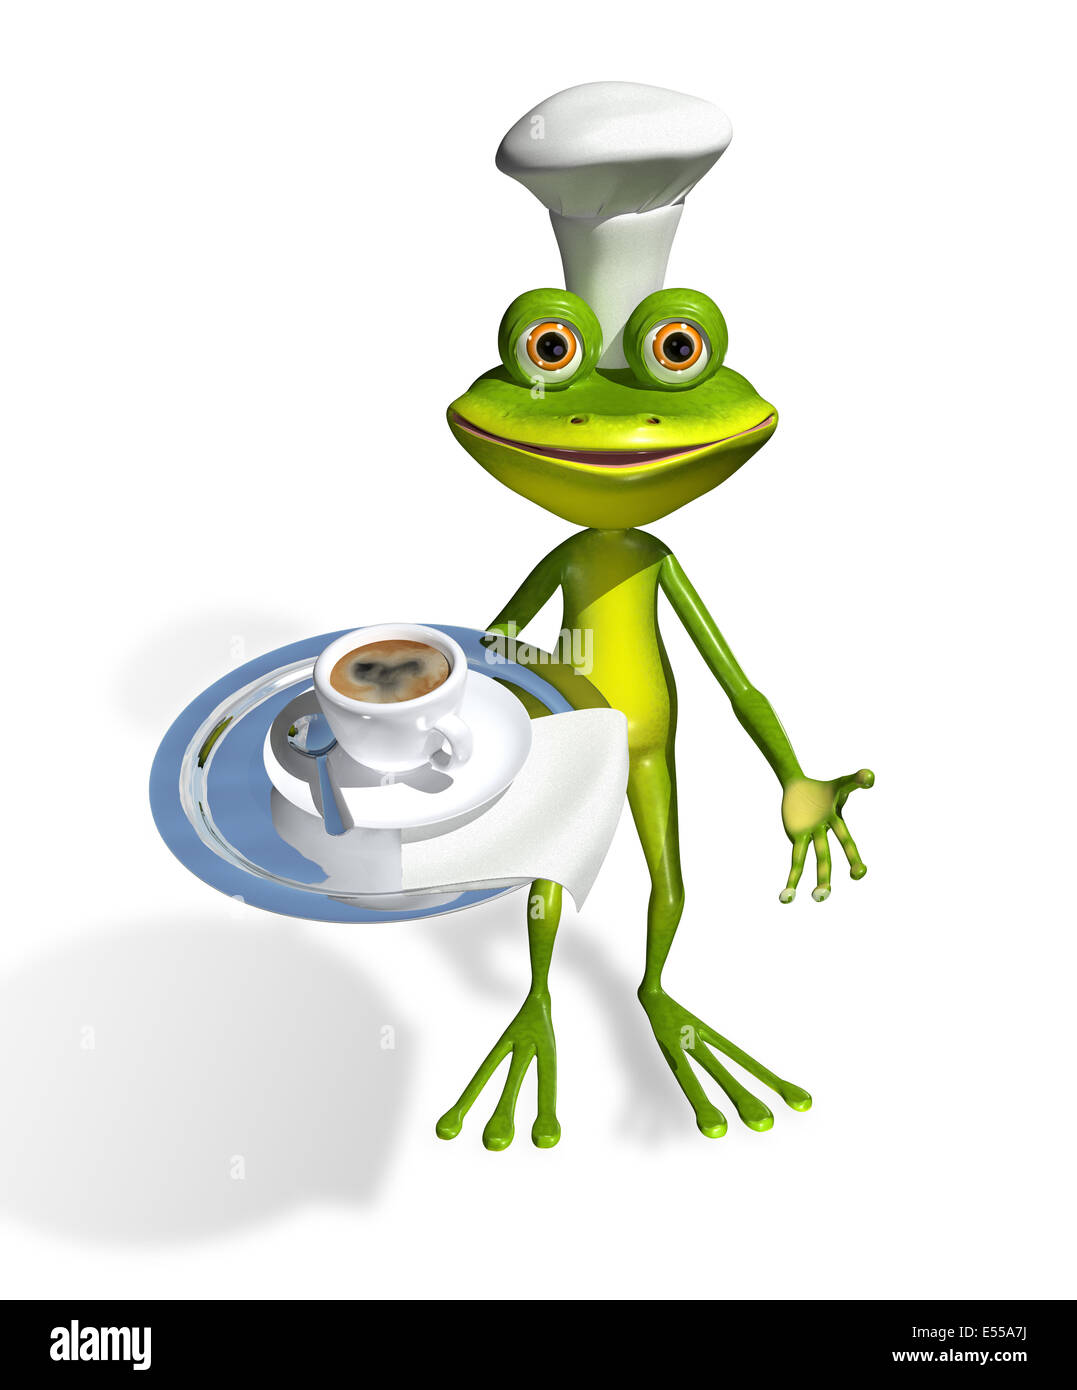 Frog cafe Cut Out Stock Images & Pictures - Alamy